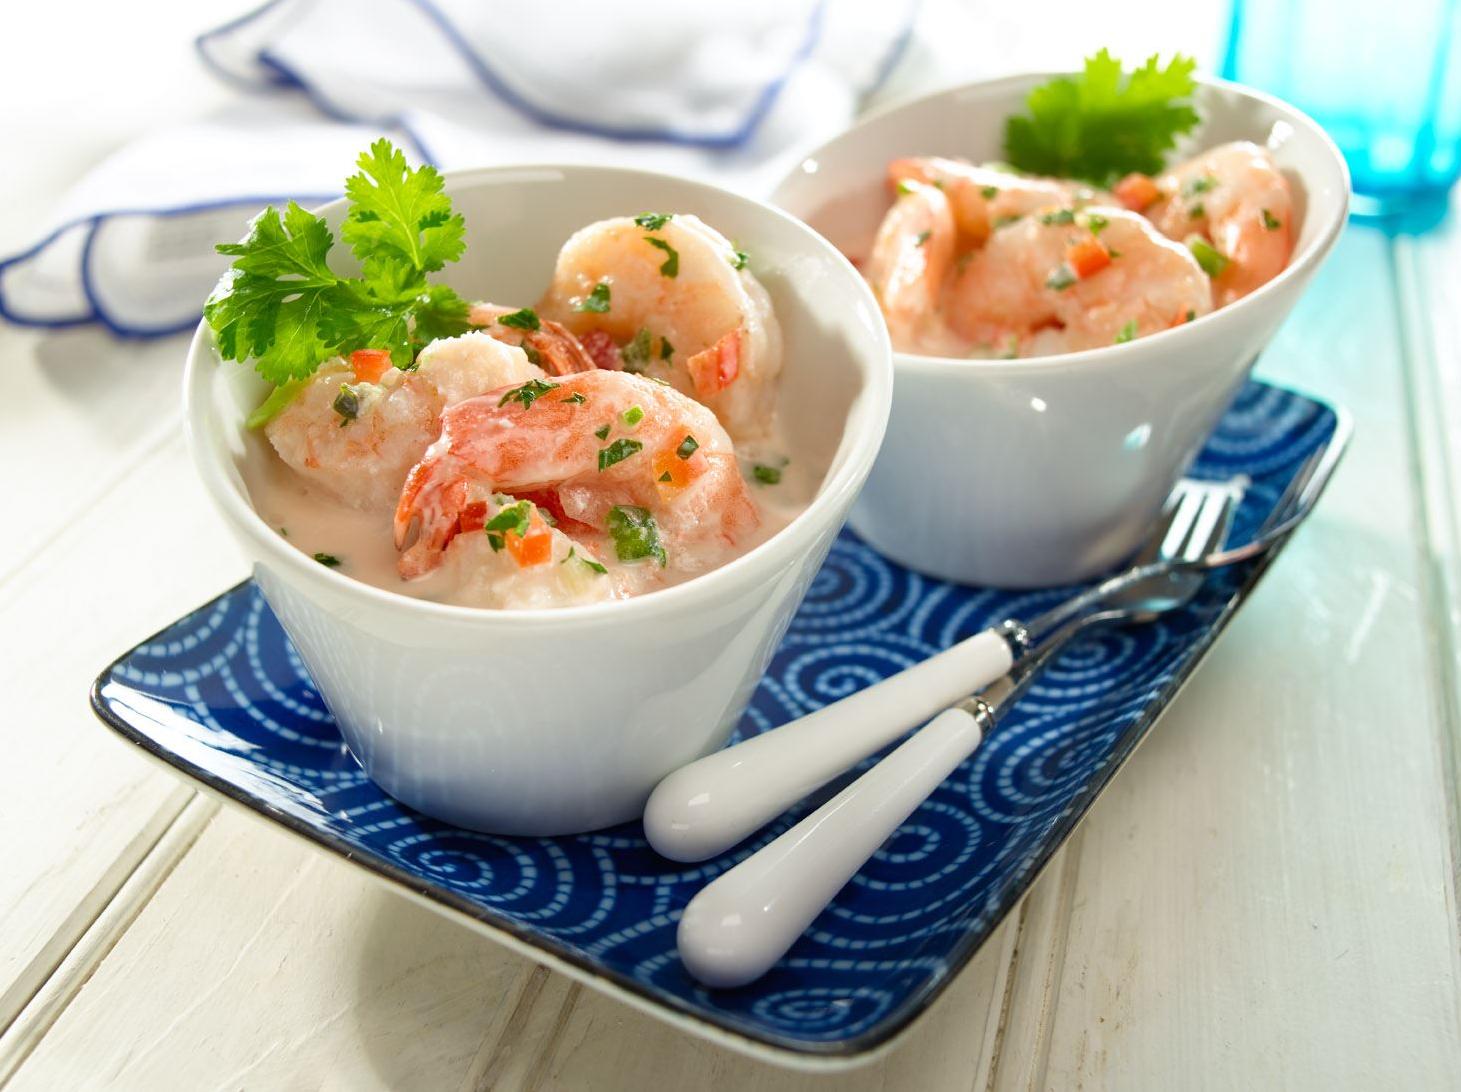  A refreshing and light appetizer perfect for any occasion.